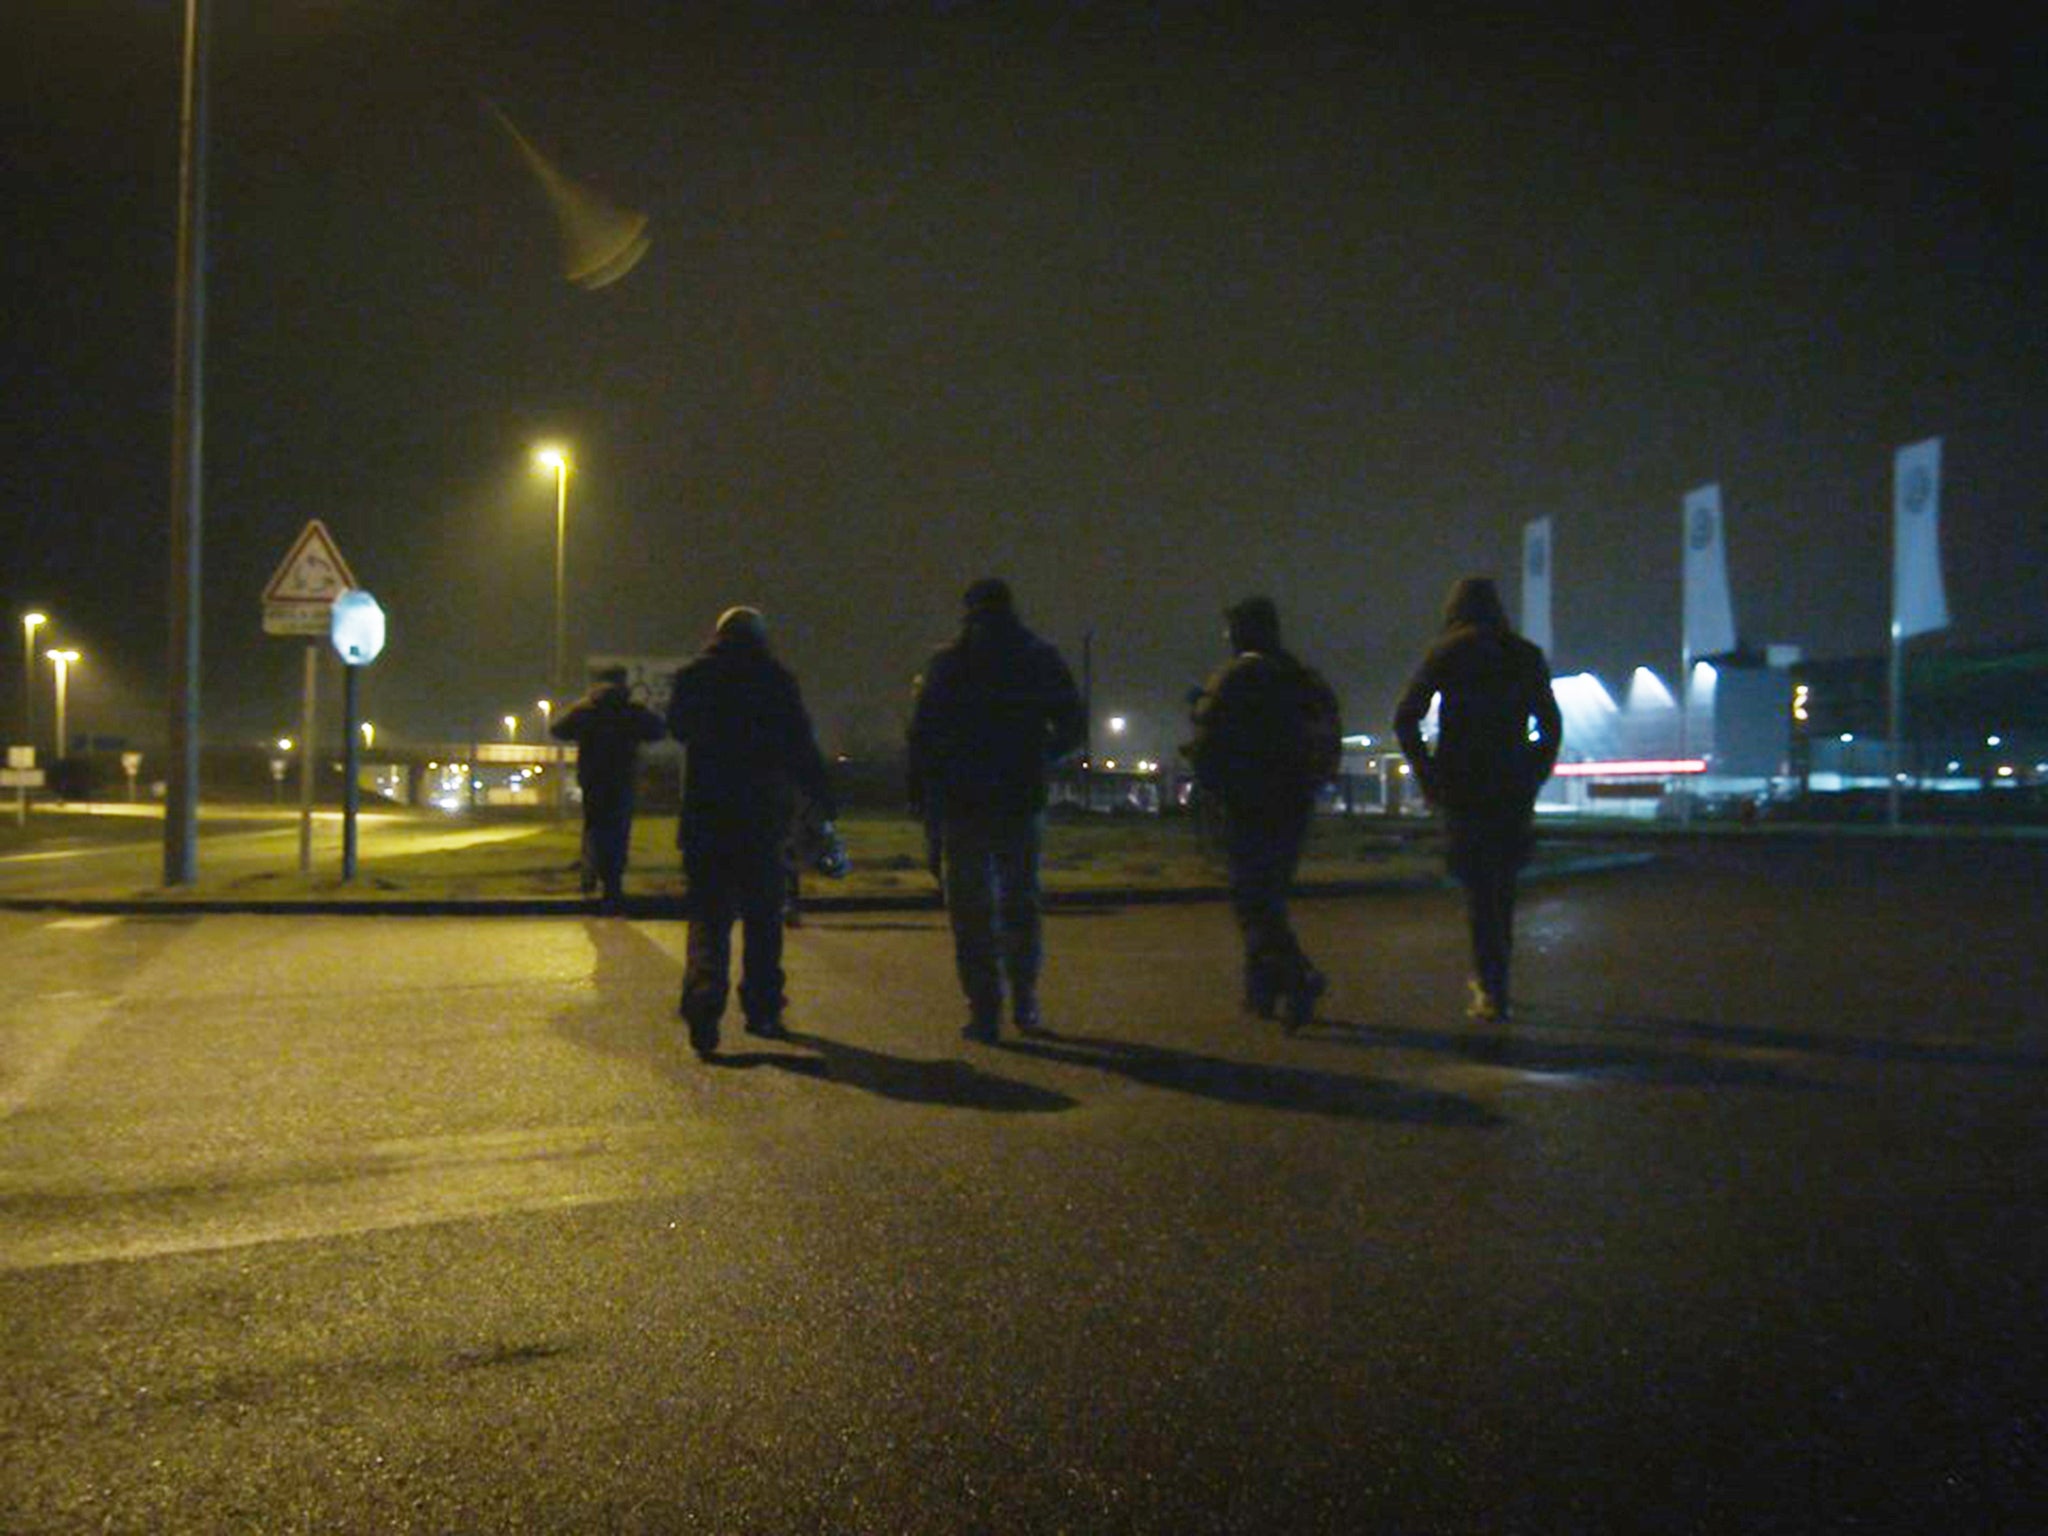  Unaccompanied minors walk in Calais during the night attempting to find a place to try climb aboard lorries without being intimidated by potential people traffickers 